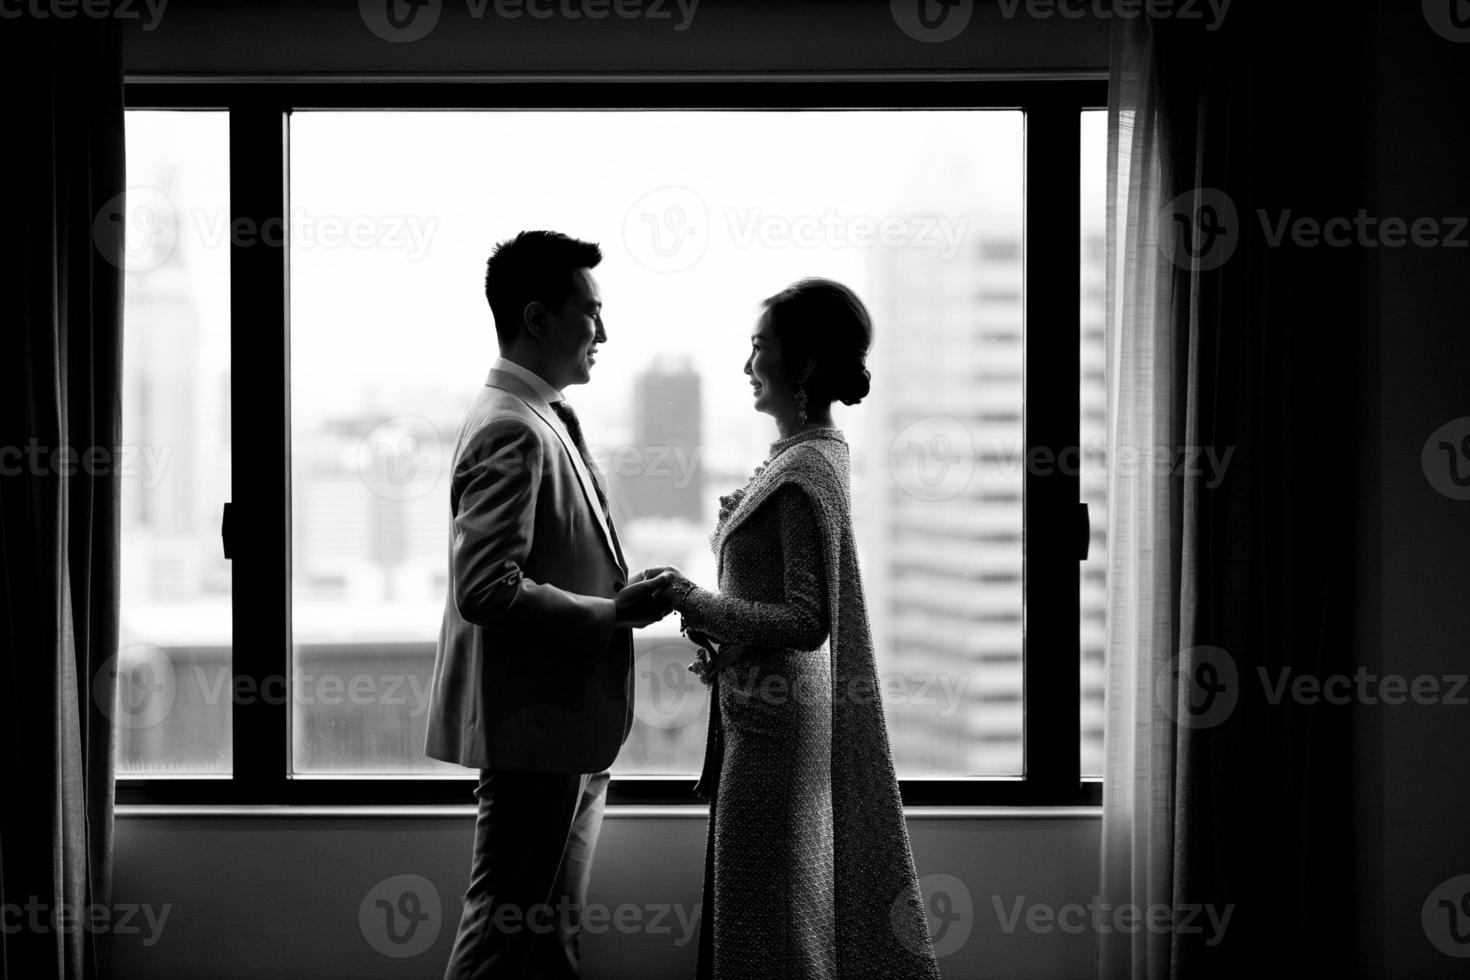 The groom are stand and holding hand on wedding dress to the bride during the engagement ceremony. Black and White photo According to the tradition of Thailand, the bride wears traditional Thai dress.